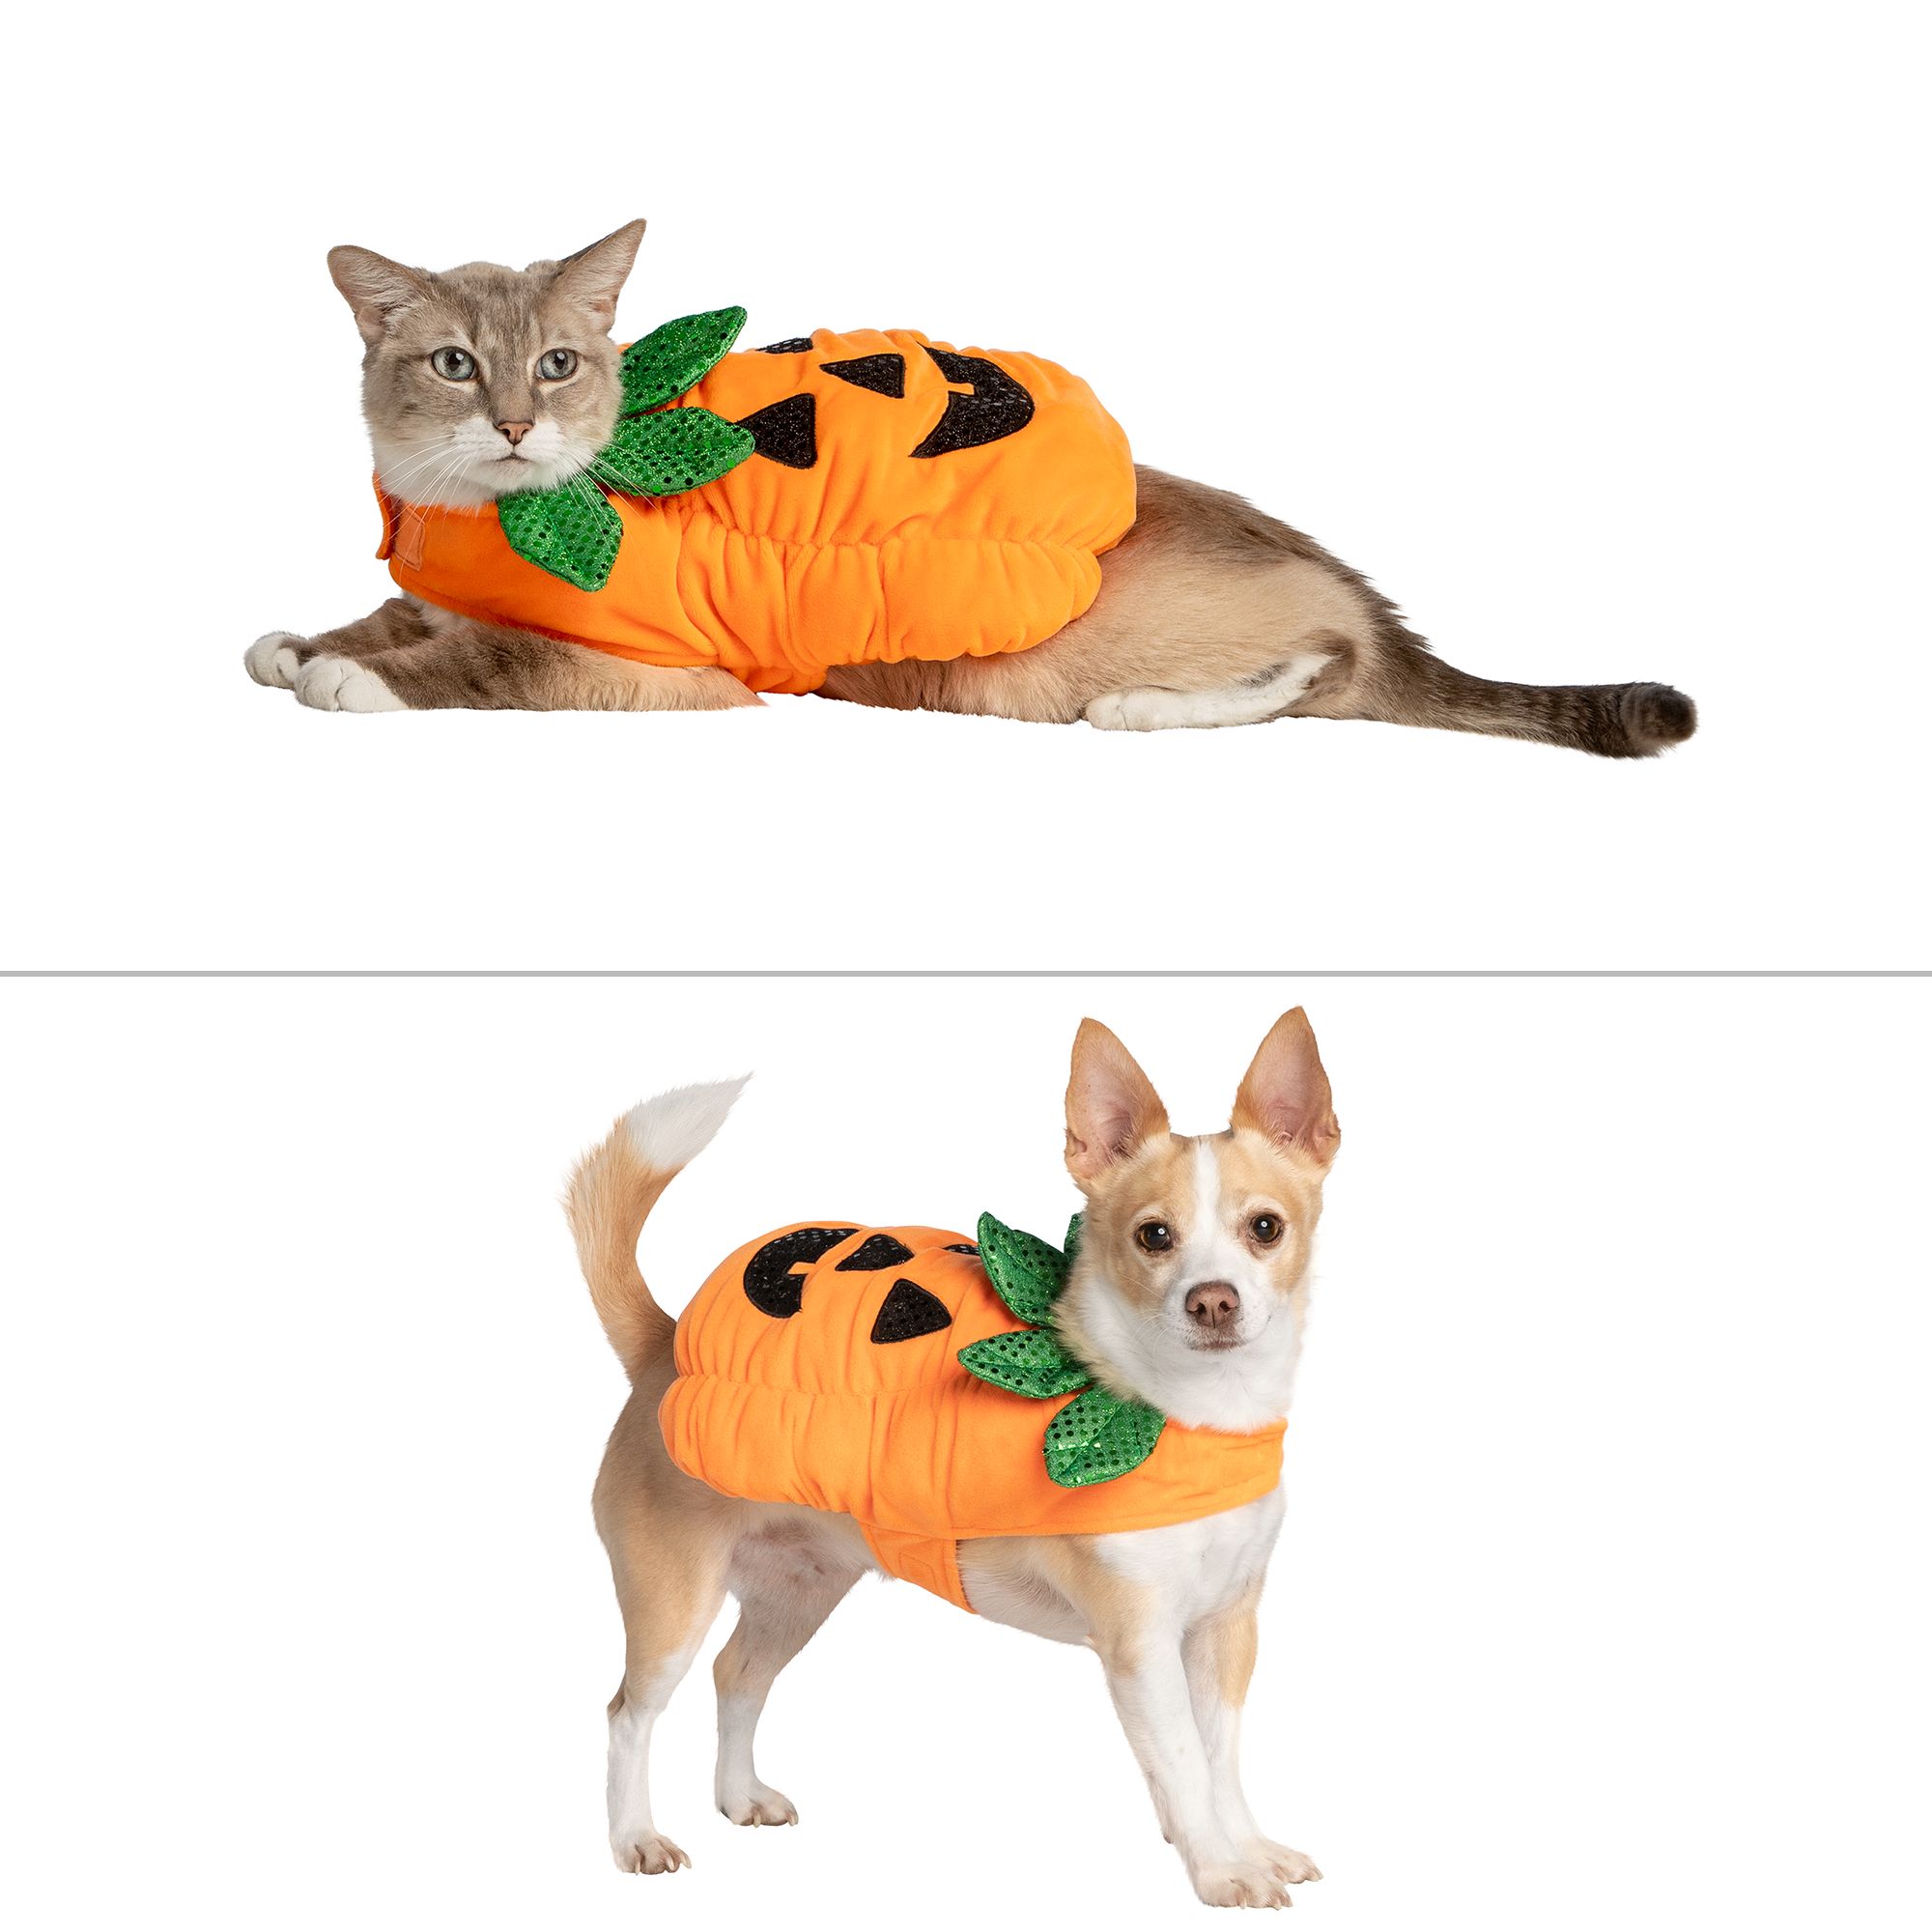 Horror4Kids on X: Petsmart is now selling Halloween costumes for